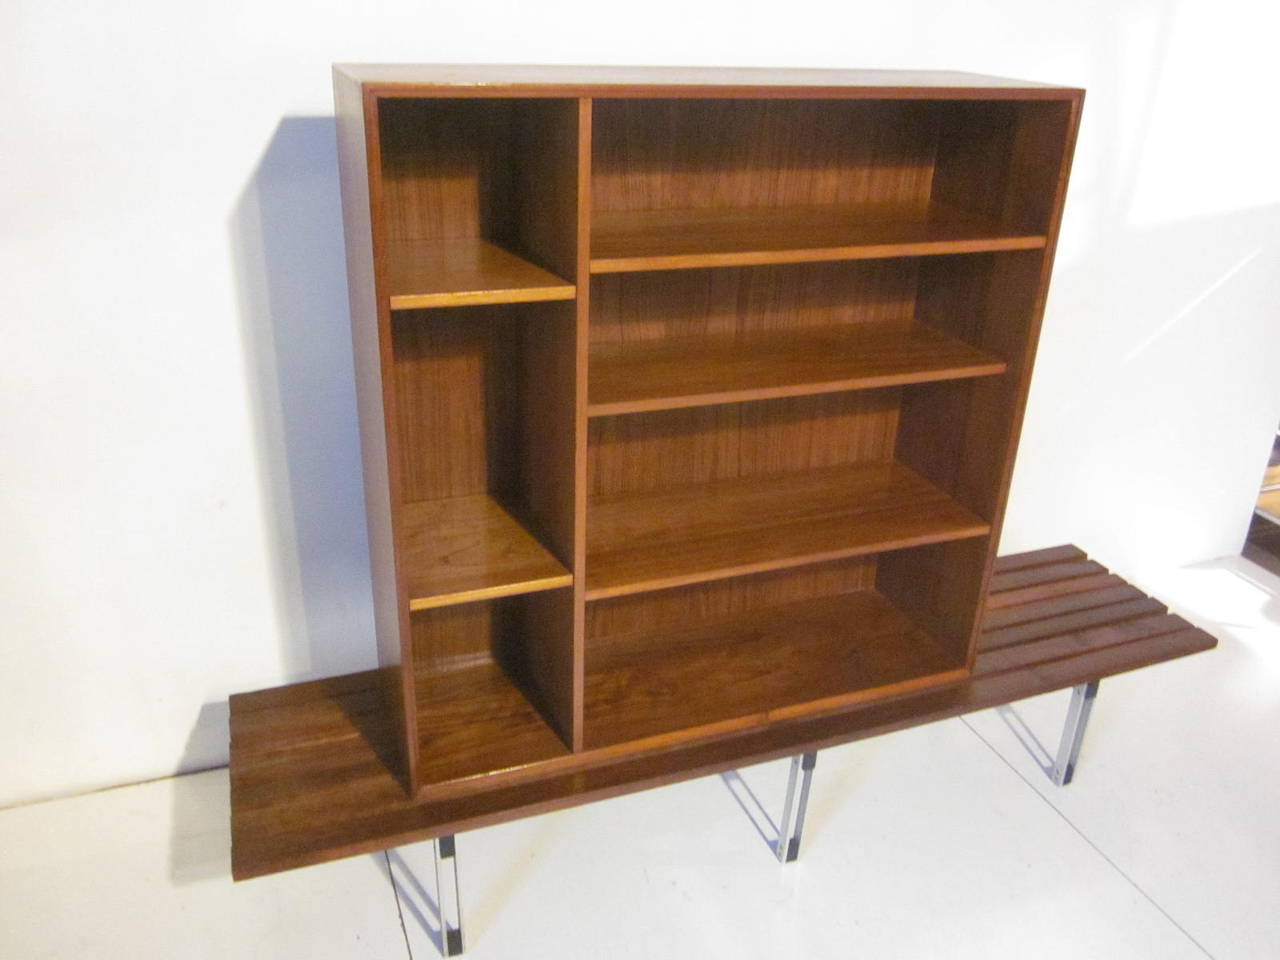 A teak wood bookcase that has adjustable shelves sitting on a slat wood bench with architectural styled metal leg supports. This two piece unit is excellent for a very light and streamline look. The bookcase itself, dimensions are 12.50